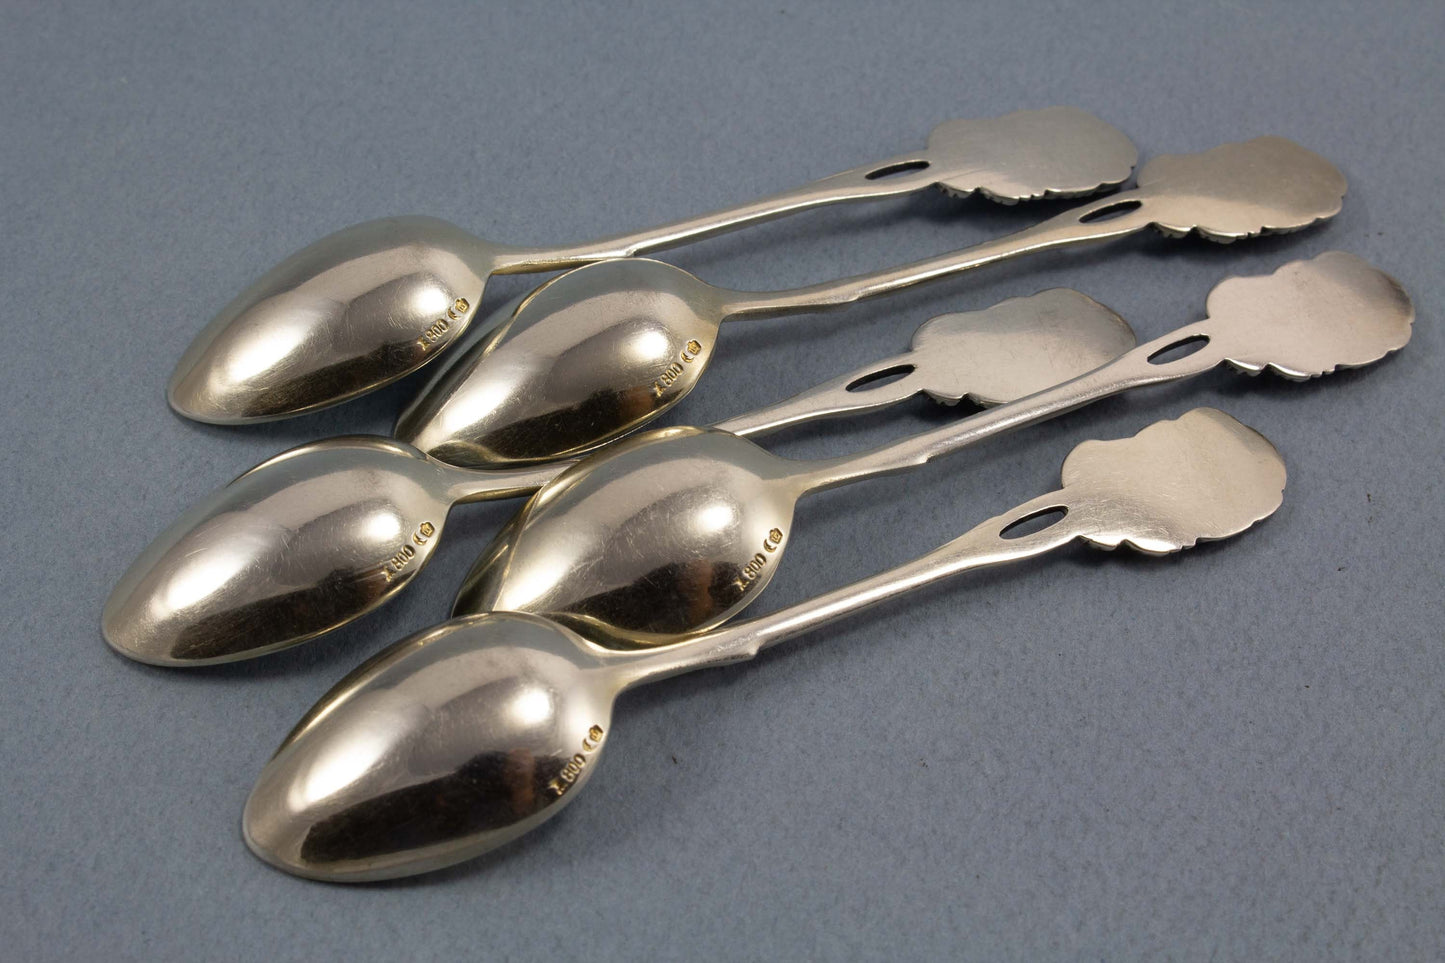 5 mocha spoons made of 800er silver, espresso spoon with roses, Wilkens 